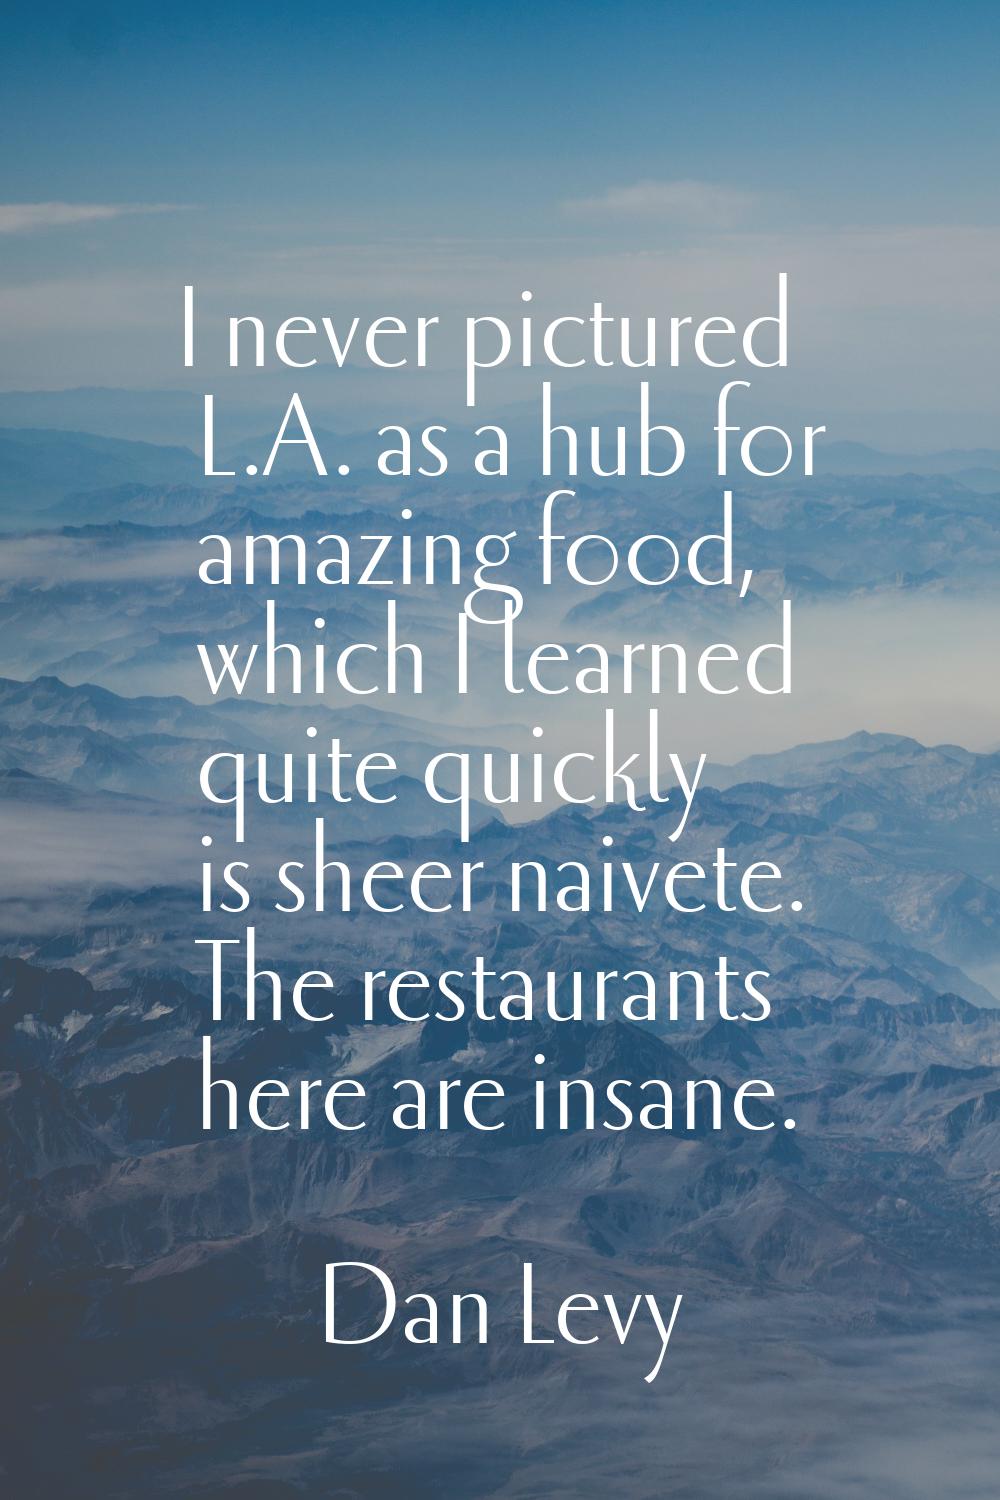 I never pictured L.A. as a hub for amazing food, which I learned quite quickly is sheer naivete. Th